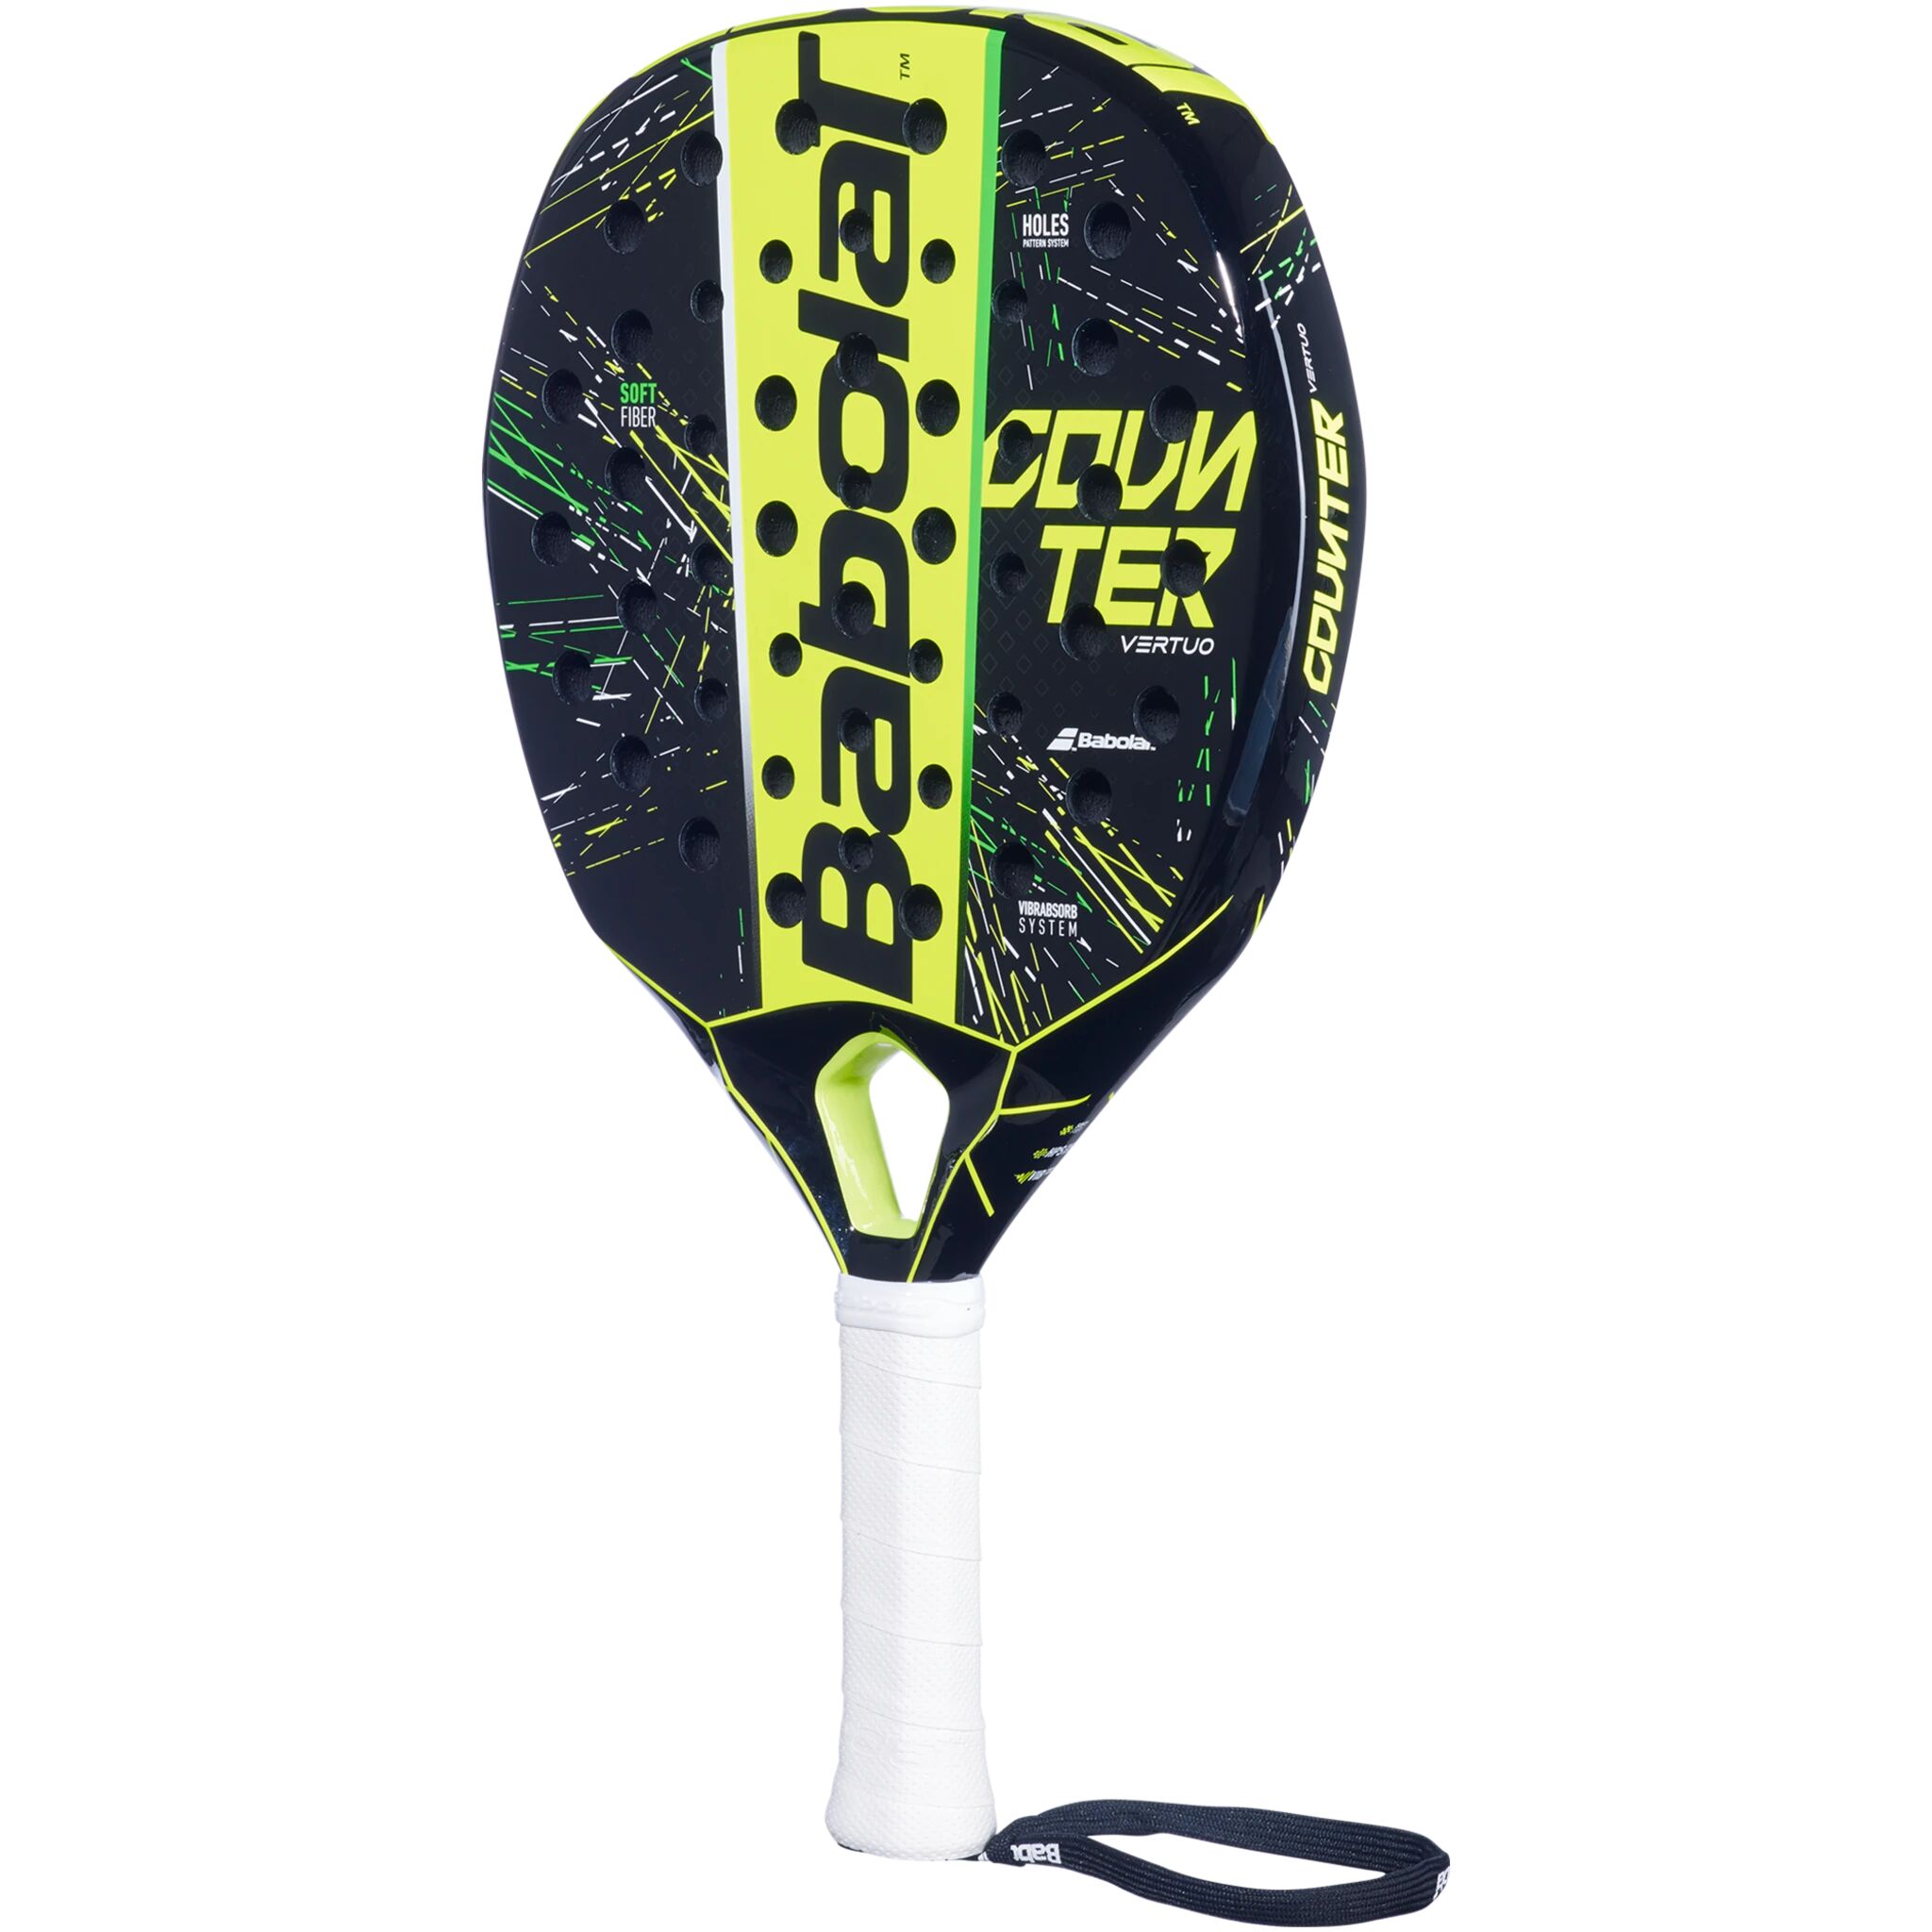 Babolat COUNTER VERTUO 2021, racket One Size Black Yellow Green